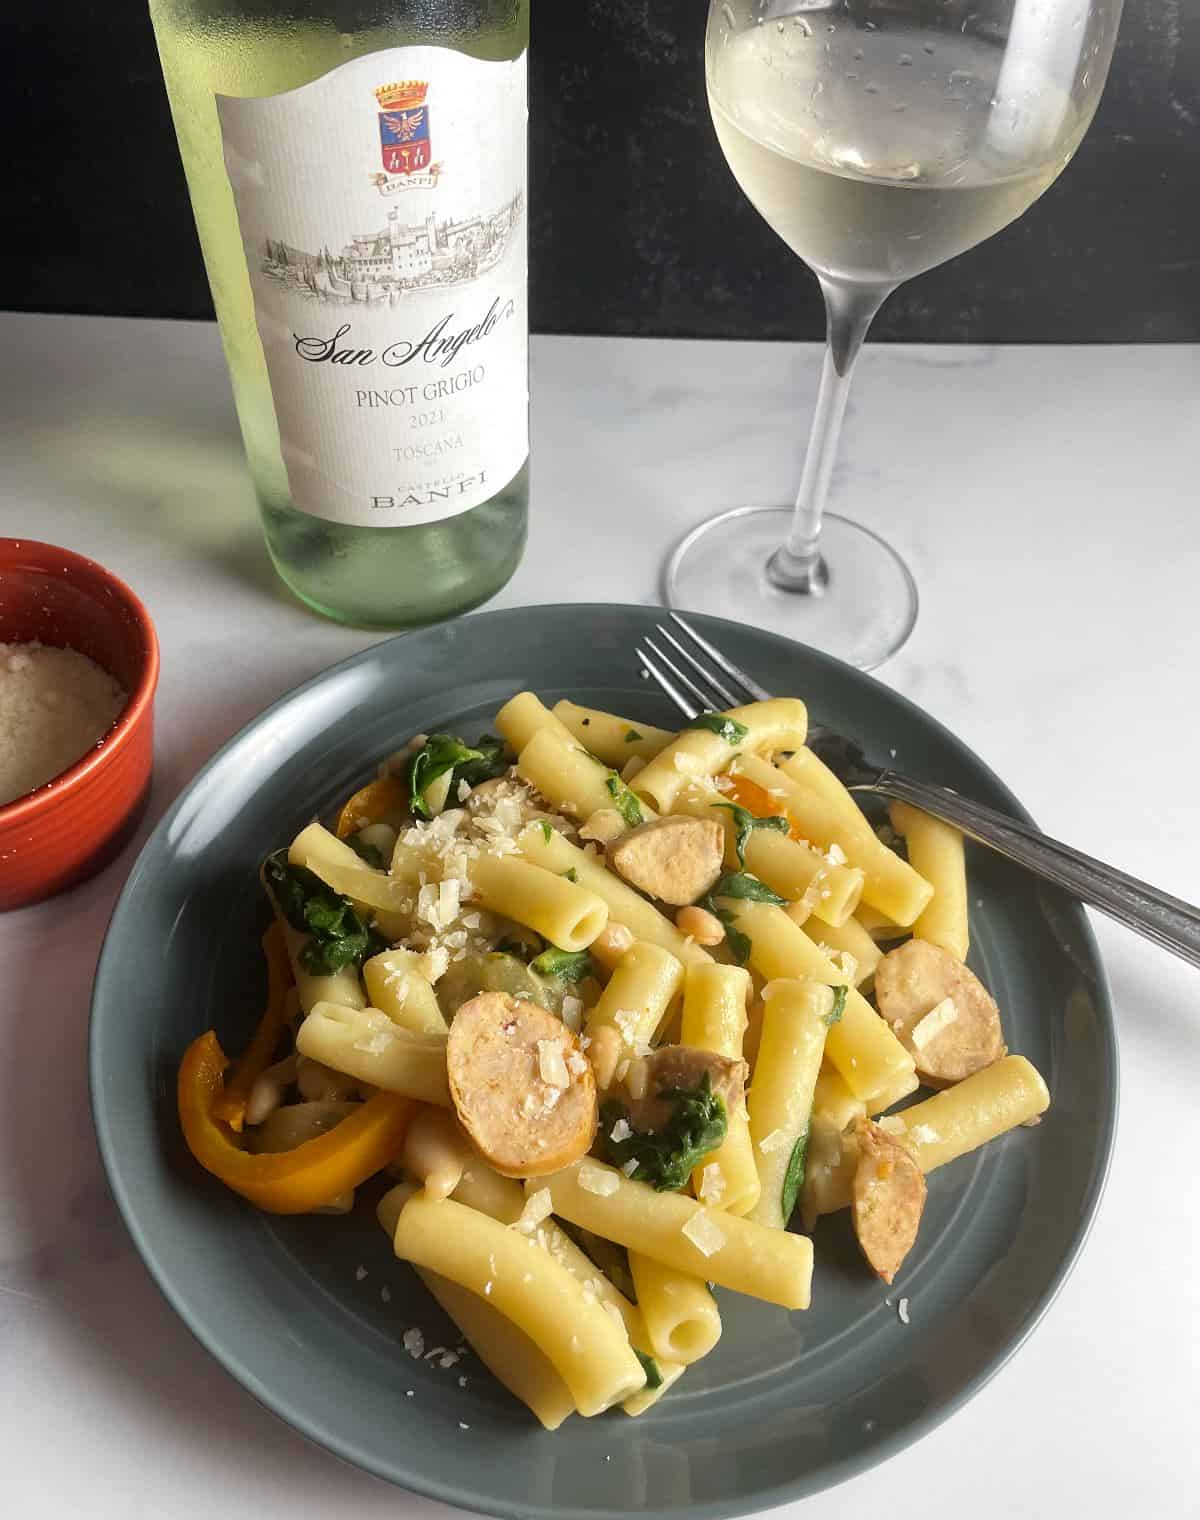 Andouille sausage pasta served on a plate along with a bottle of Pinot Grigio.